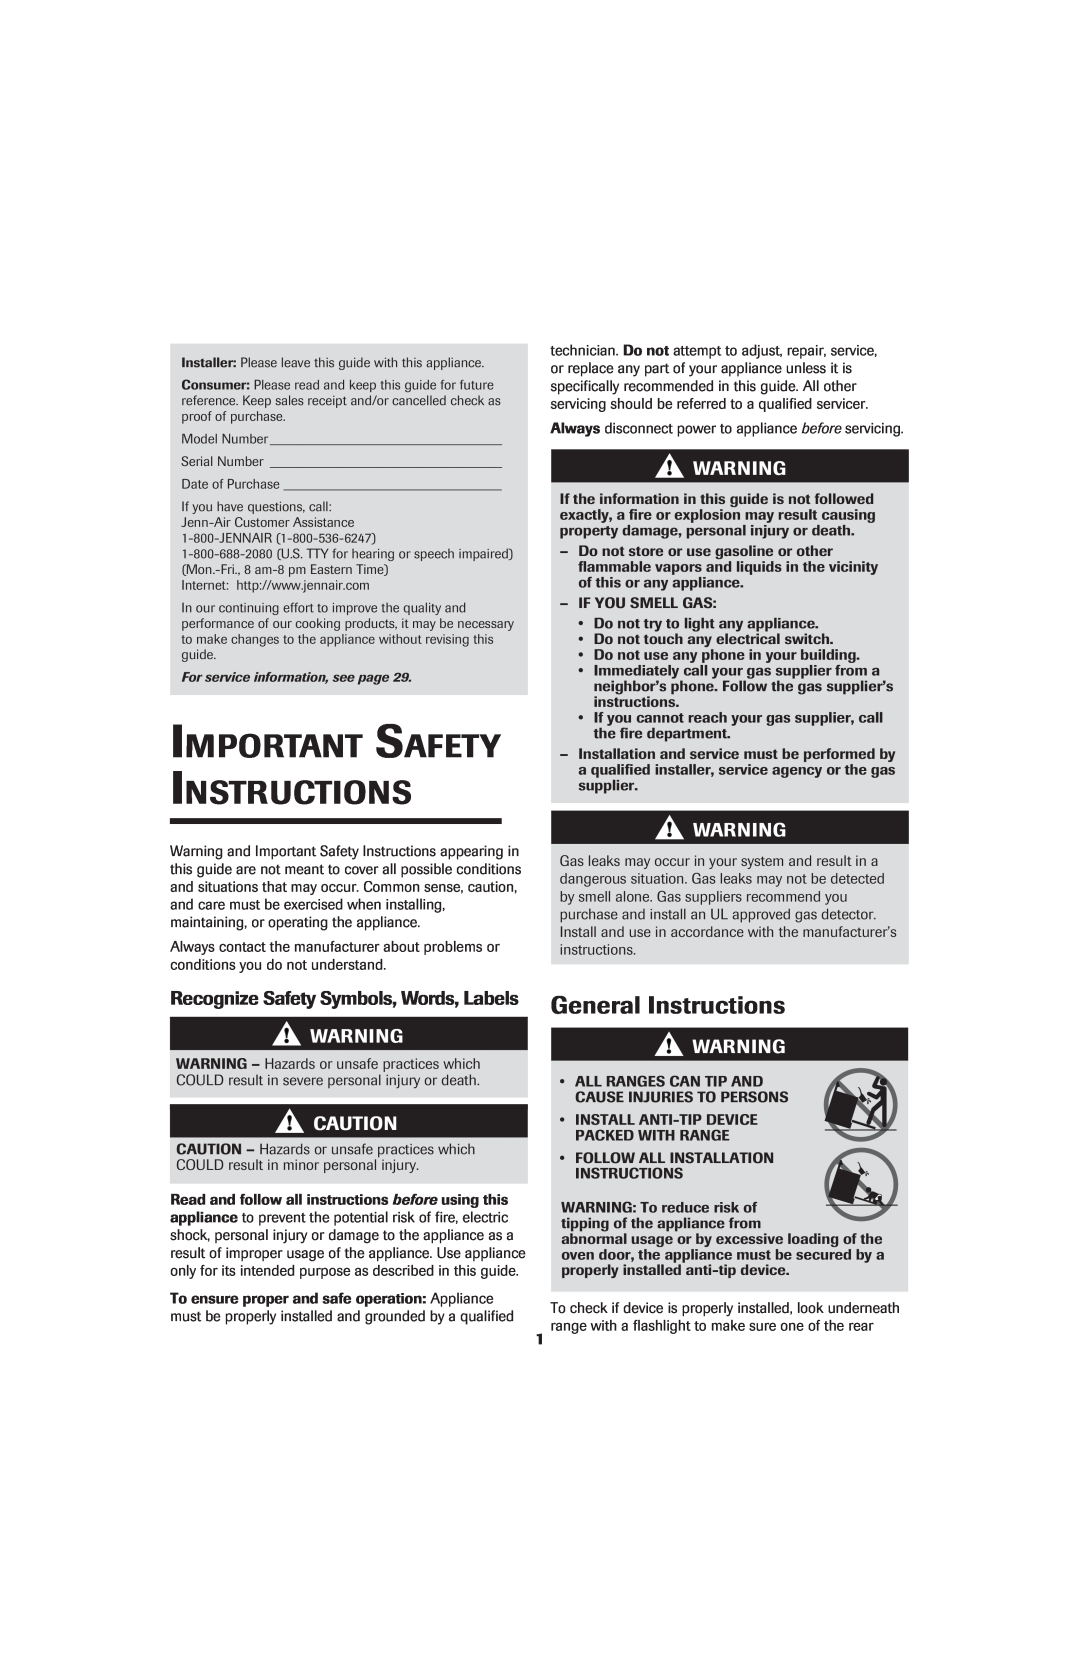 Jenn-Air 8113P759-60 General Instructions, Recognize Safety Symbols, Words, Labels, Important Safety Instructions 